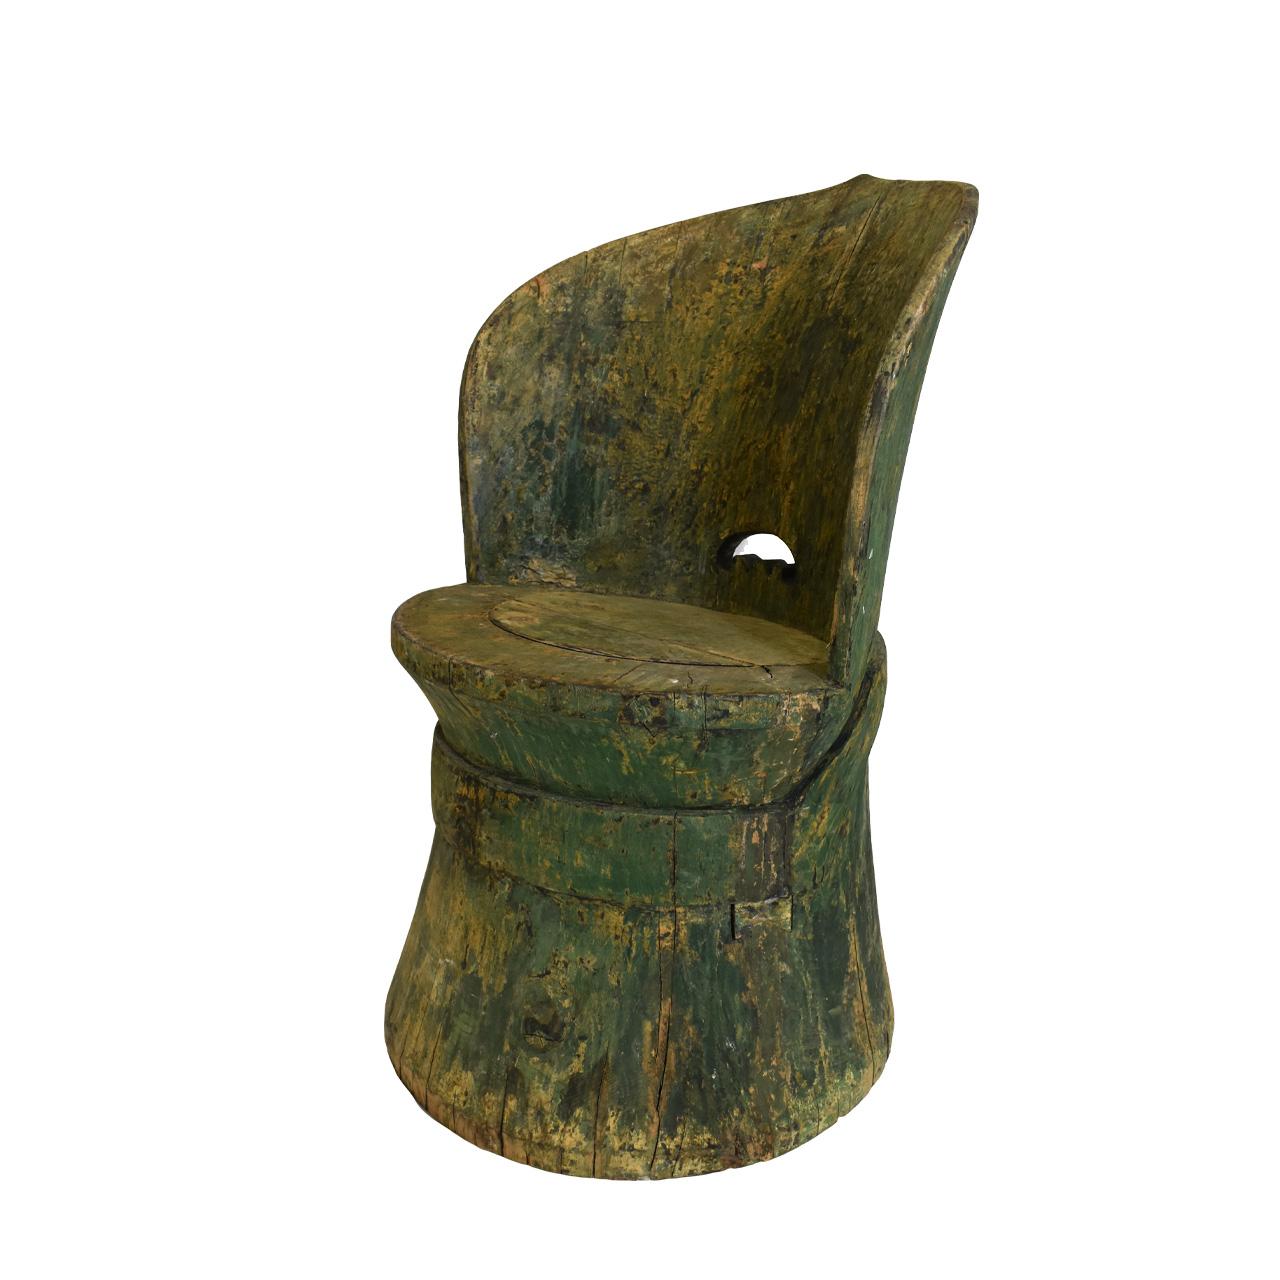 A Swedish Kubbestol chair carved from a tree trunk. The bottom is hollowed and top carved to make the back. Considered Swedish Folk Art.